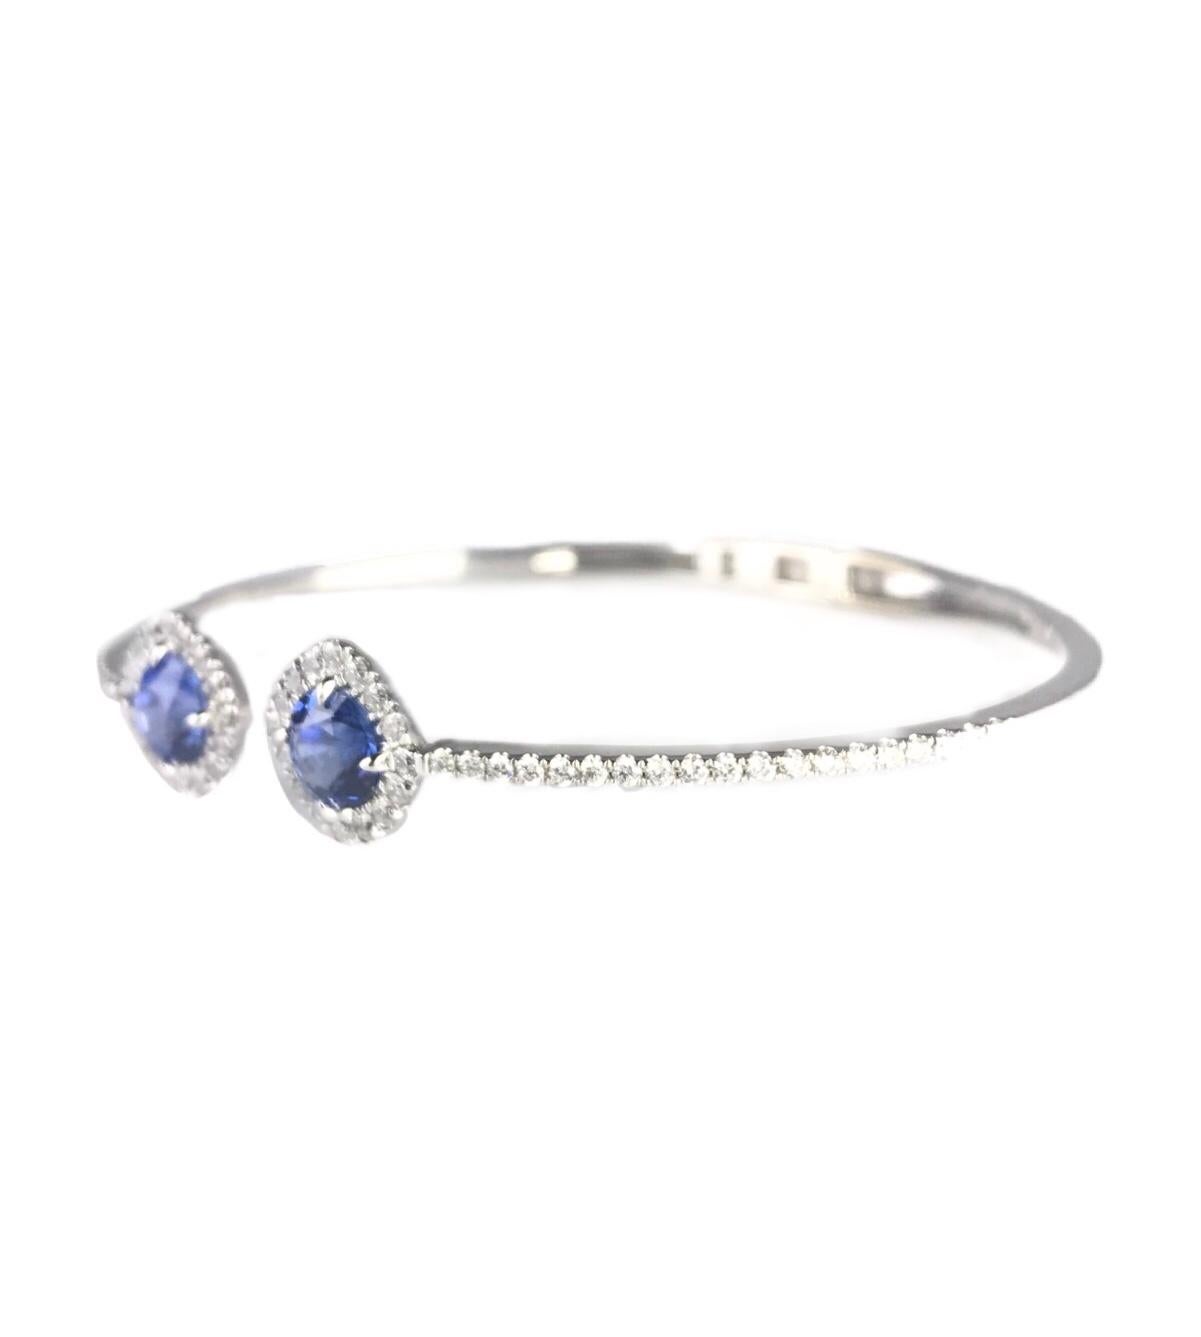 This bangle bracelet has two round sapphires totaling 2.23 carats at the heads. Each sapphire is inside a halo of round diamonds, with additional diamonds extending halfway down the length of the bangle (total weight 0.86 carats).
Set in 14k White